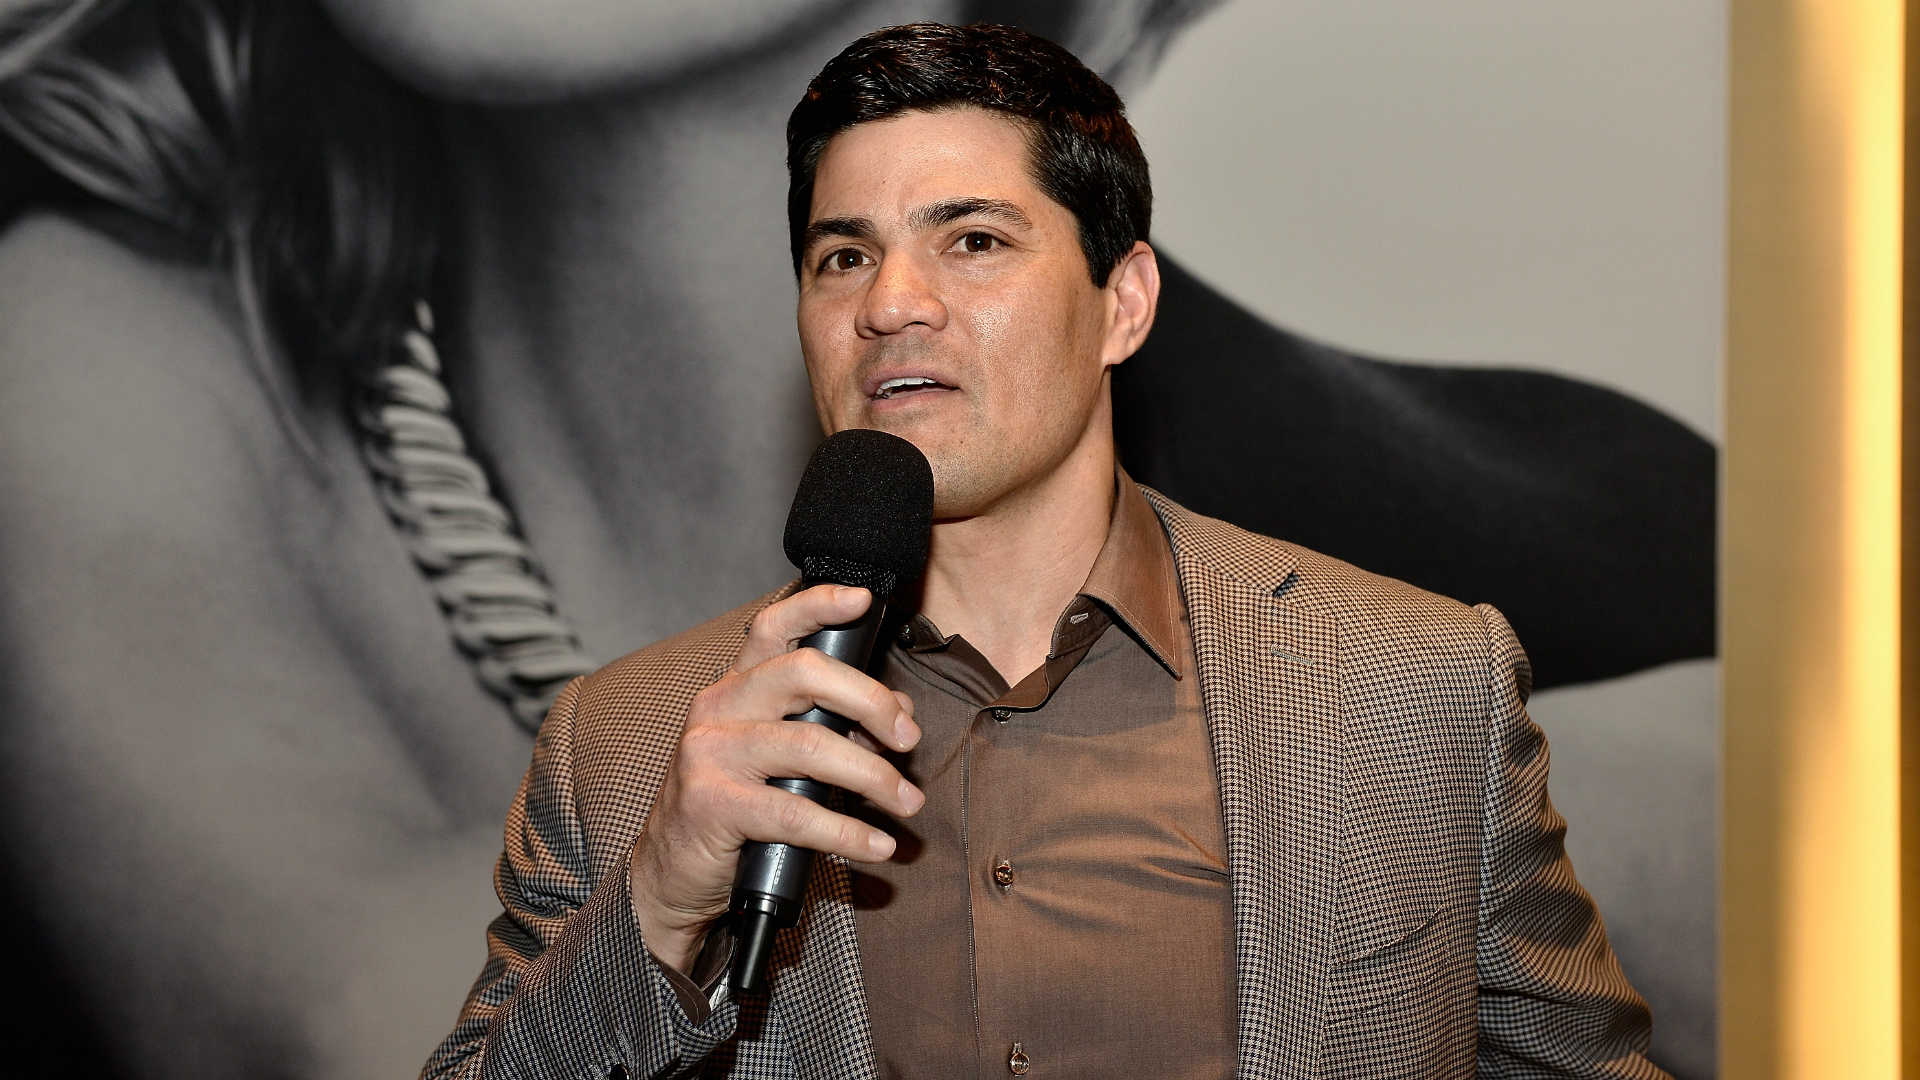 Former NFL player, ESPN analyst Tedy Bruschi 'recovering well' after stroke